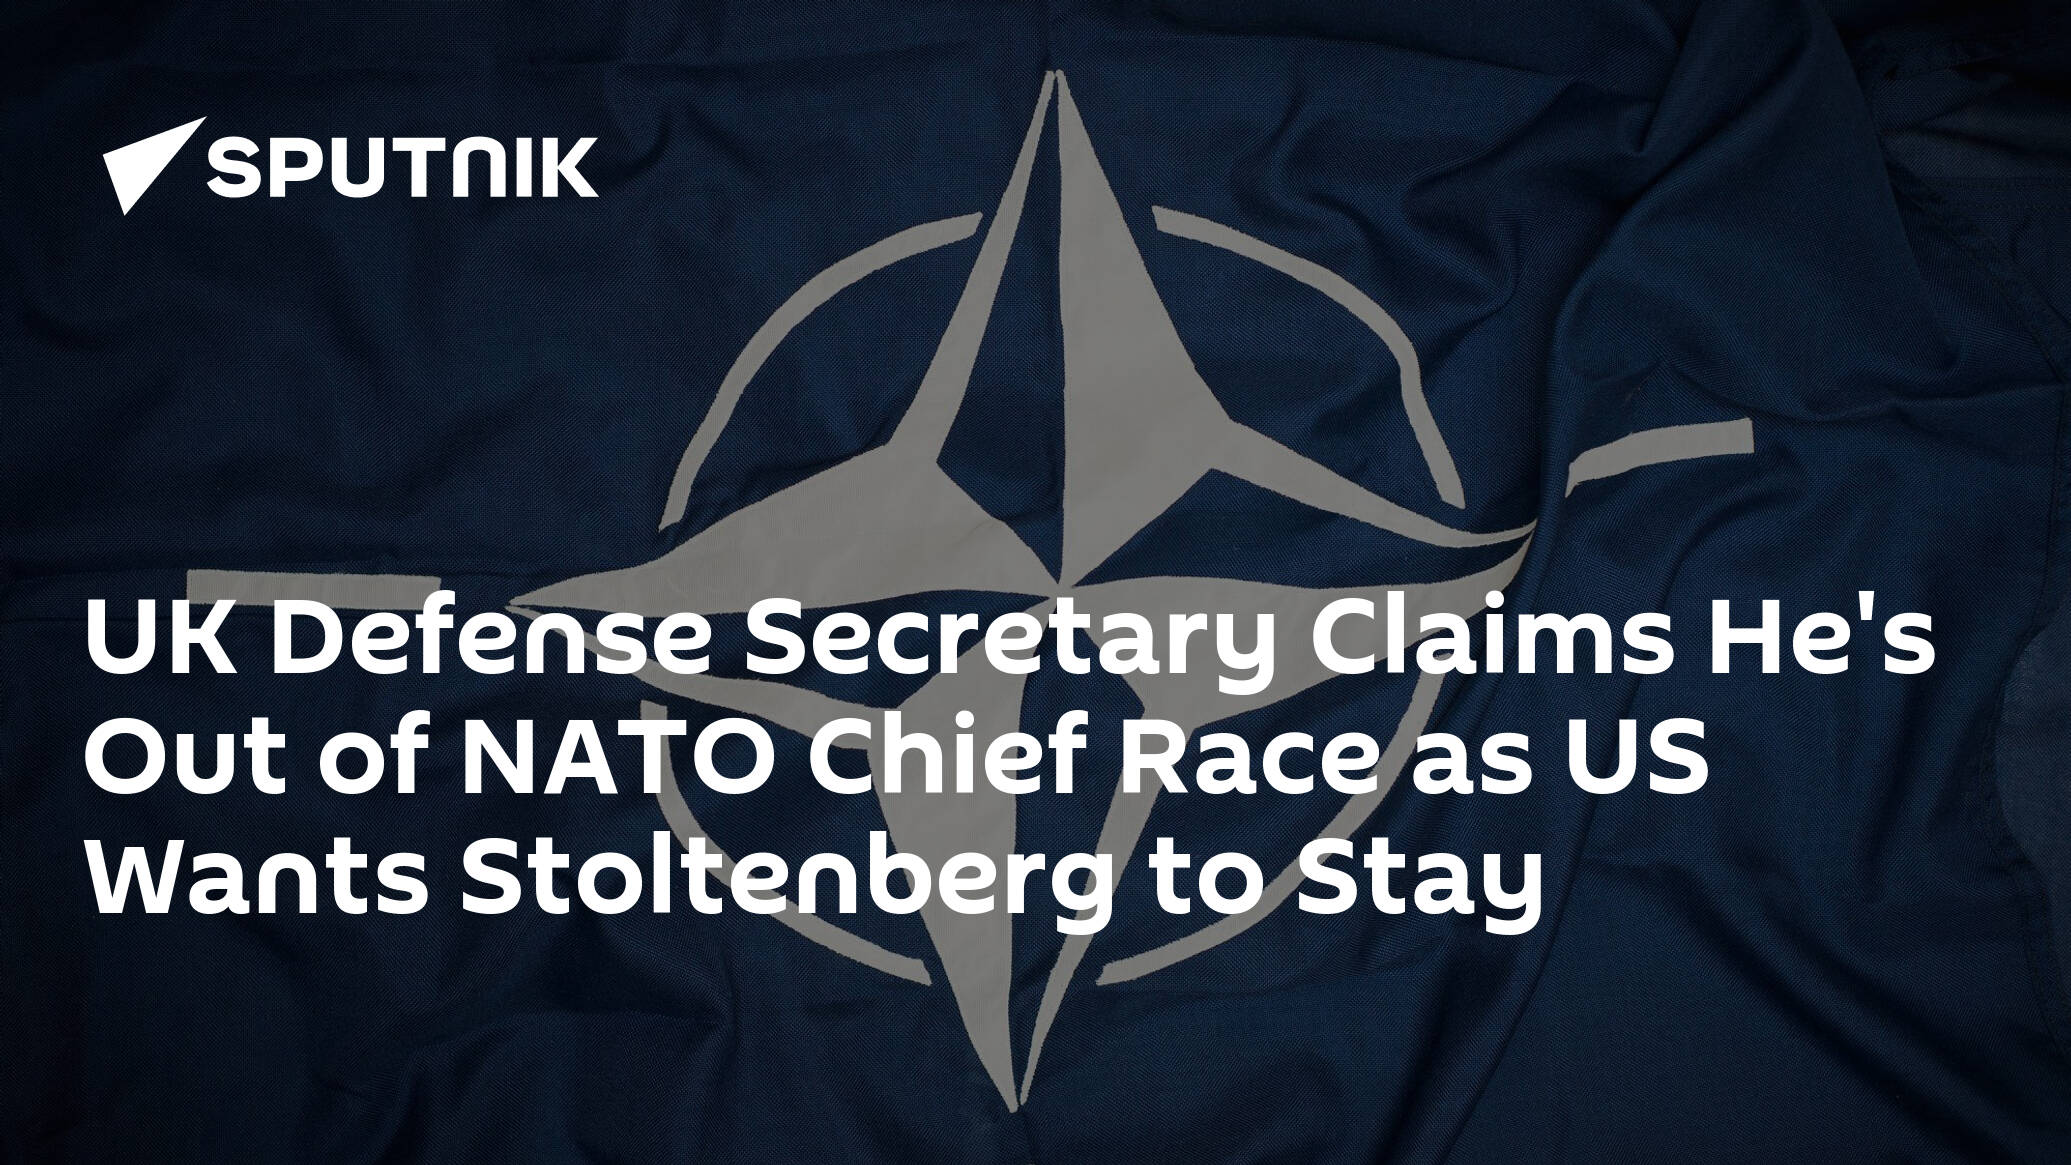 UK Defense Secretary Claims He's Out of NATO Chief Race as US Wants Stoltenberg to Stay